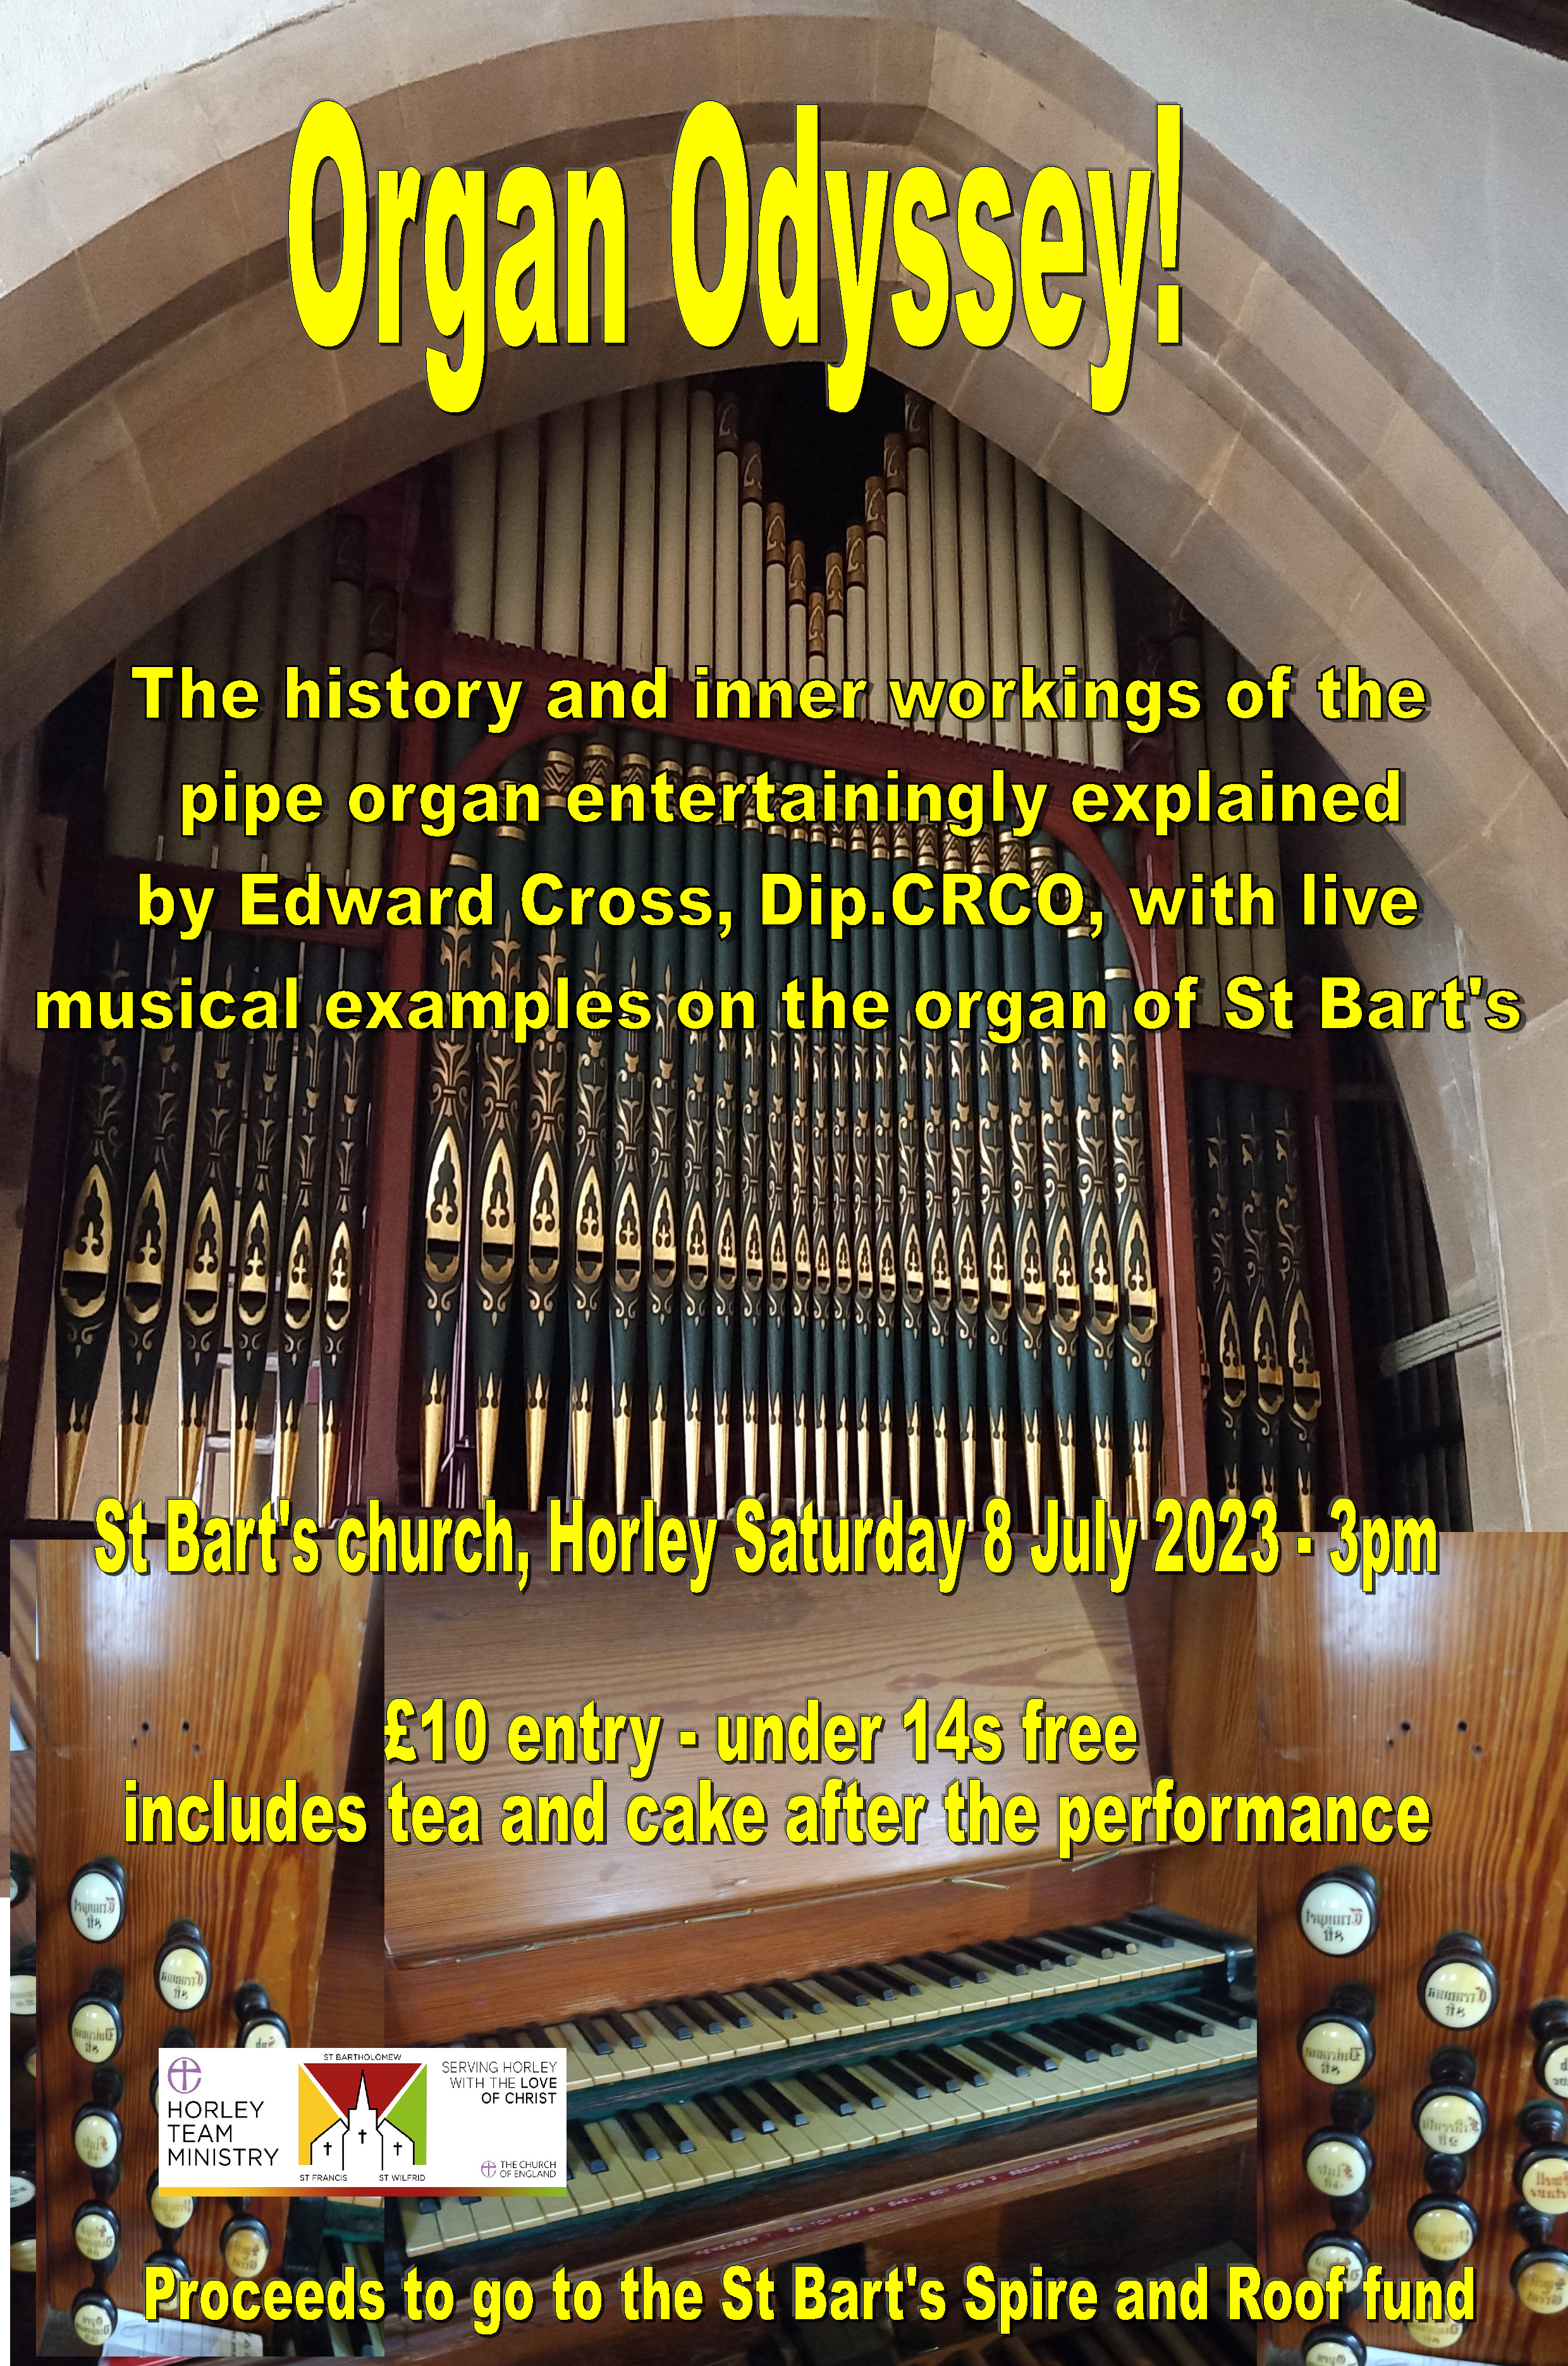 Organ Odyssey! The History and inner workings of the pipe organ entertainingly explained by Edward Cross, Dip.CRCO, with live musical examples on the organ of St Bart's.  St Bart's Church, Horley Saturday 8 July 2023 - 3pm £10 Entry - under 14s free includes tea and cake after the performance. proceeds go to the St Bart's Spire and Roof fund